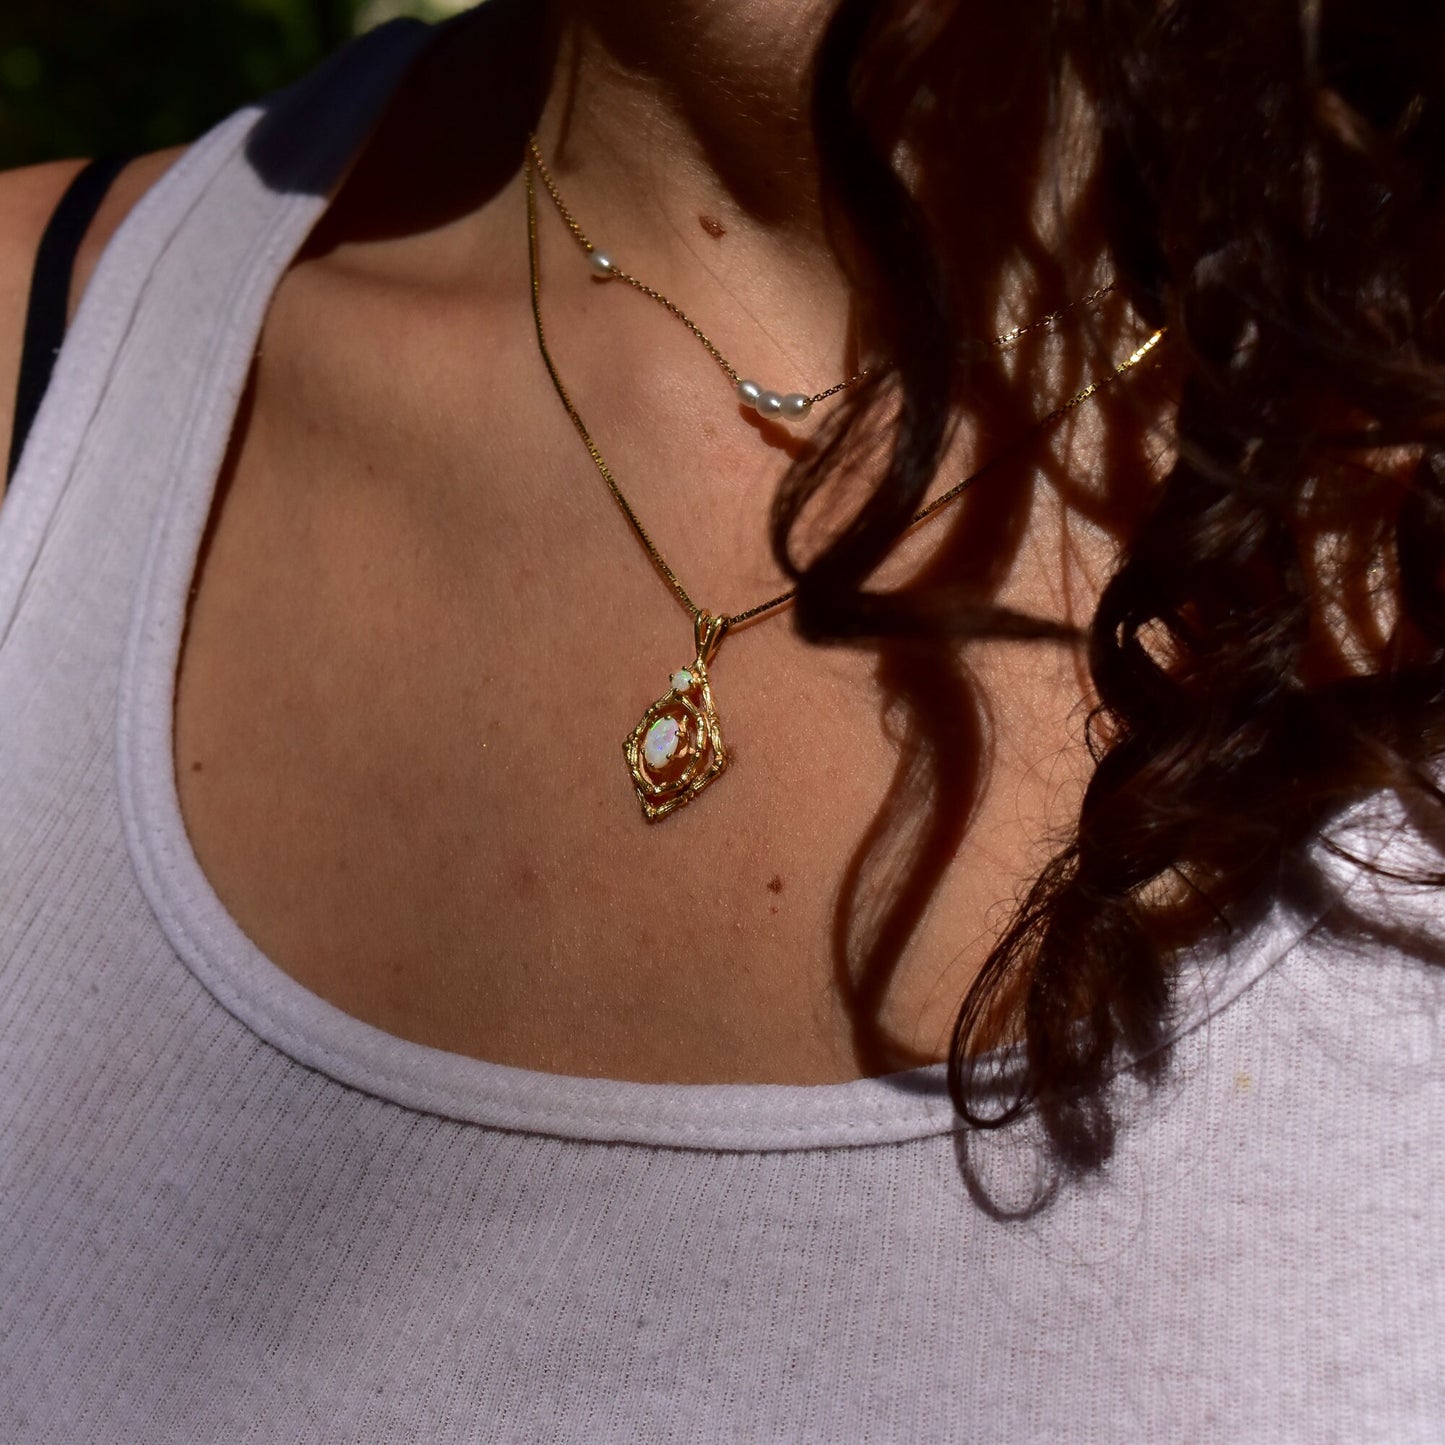 10K yellow gold opal pendant necklace with bamboo motif design worn by a woman with curly brown hair against her shoulder and white top.